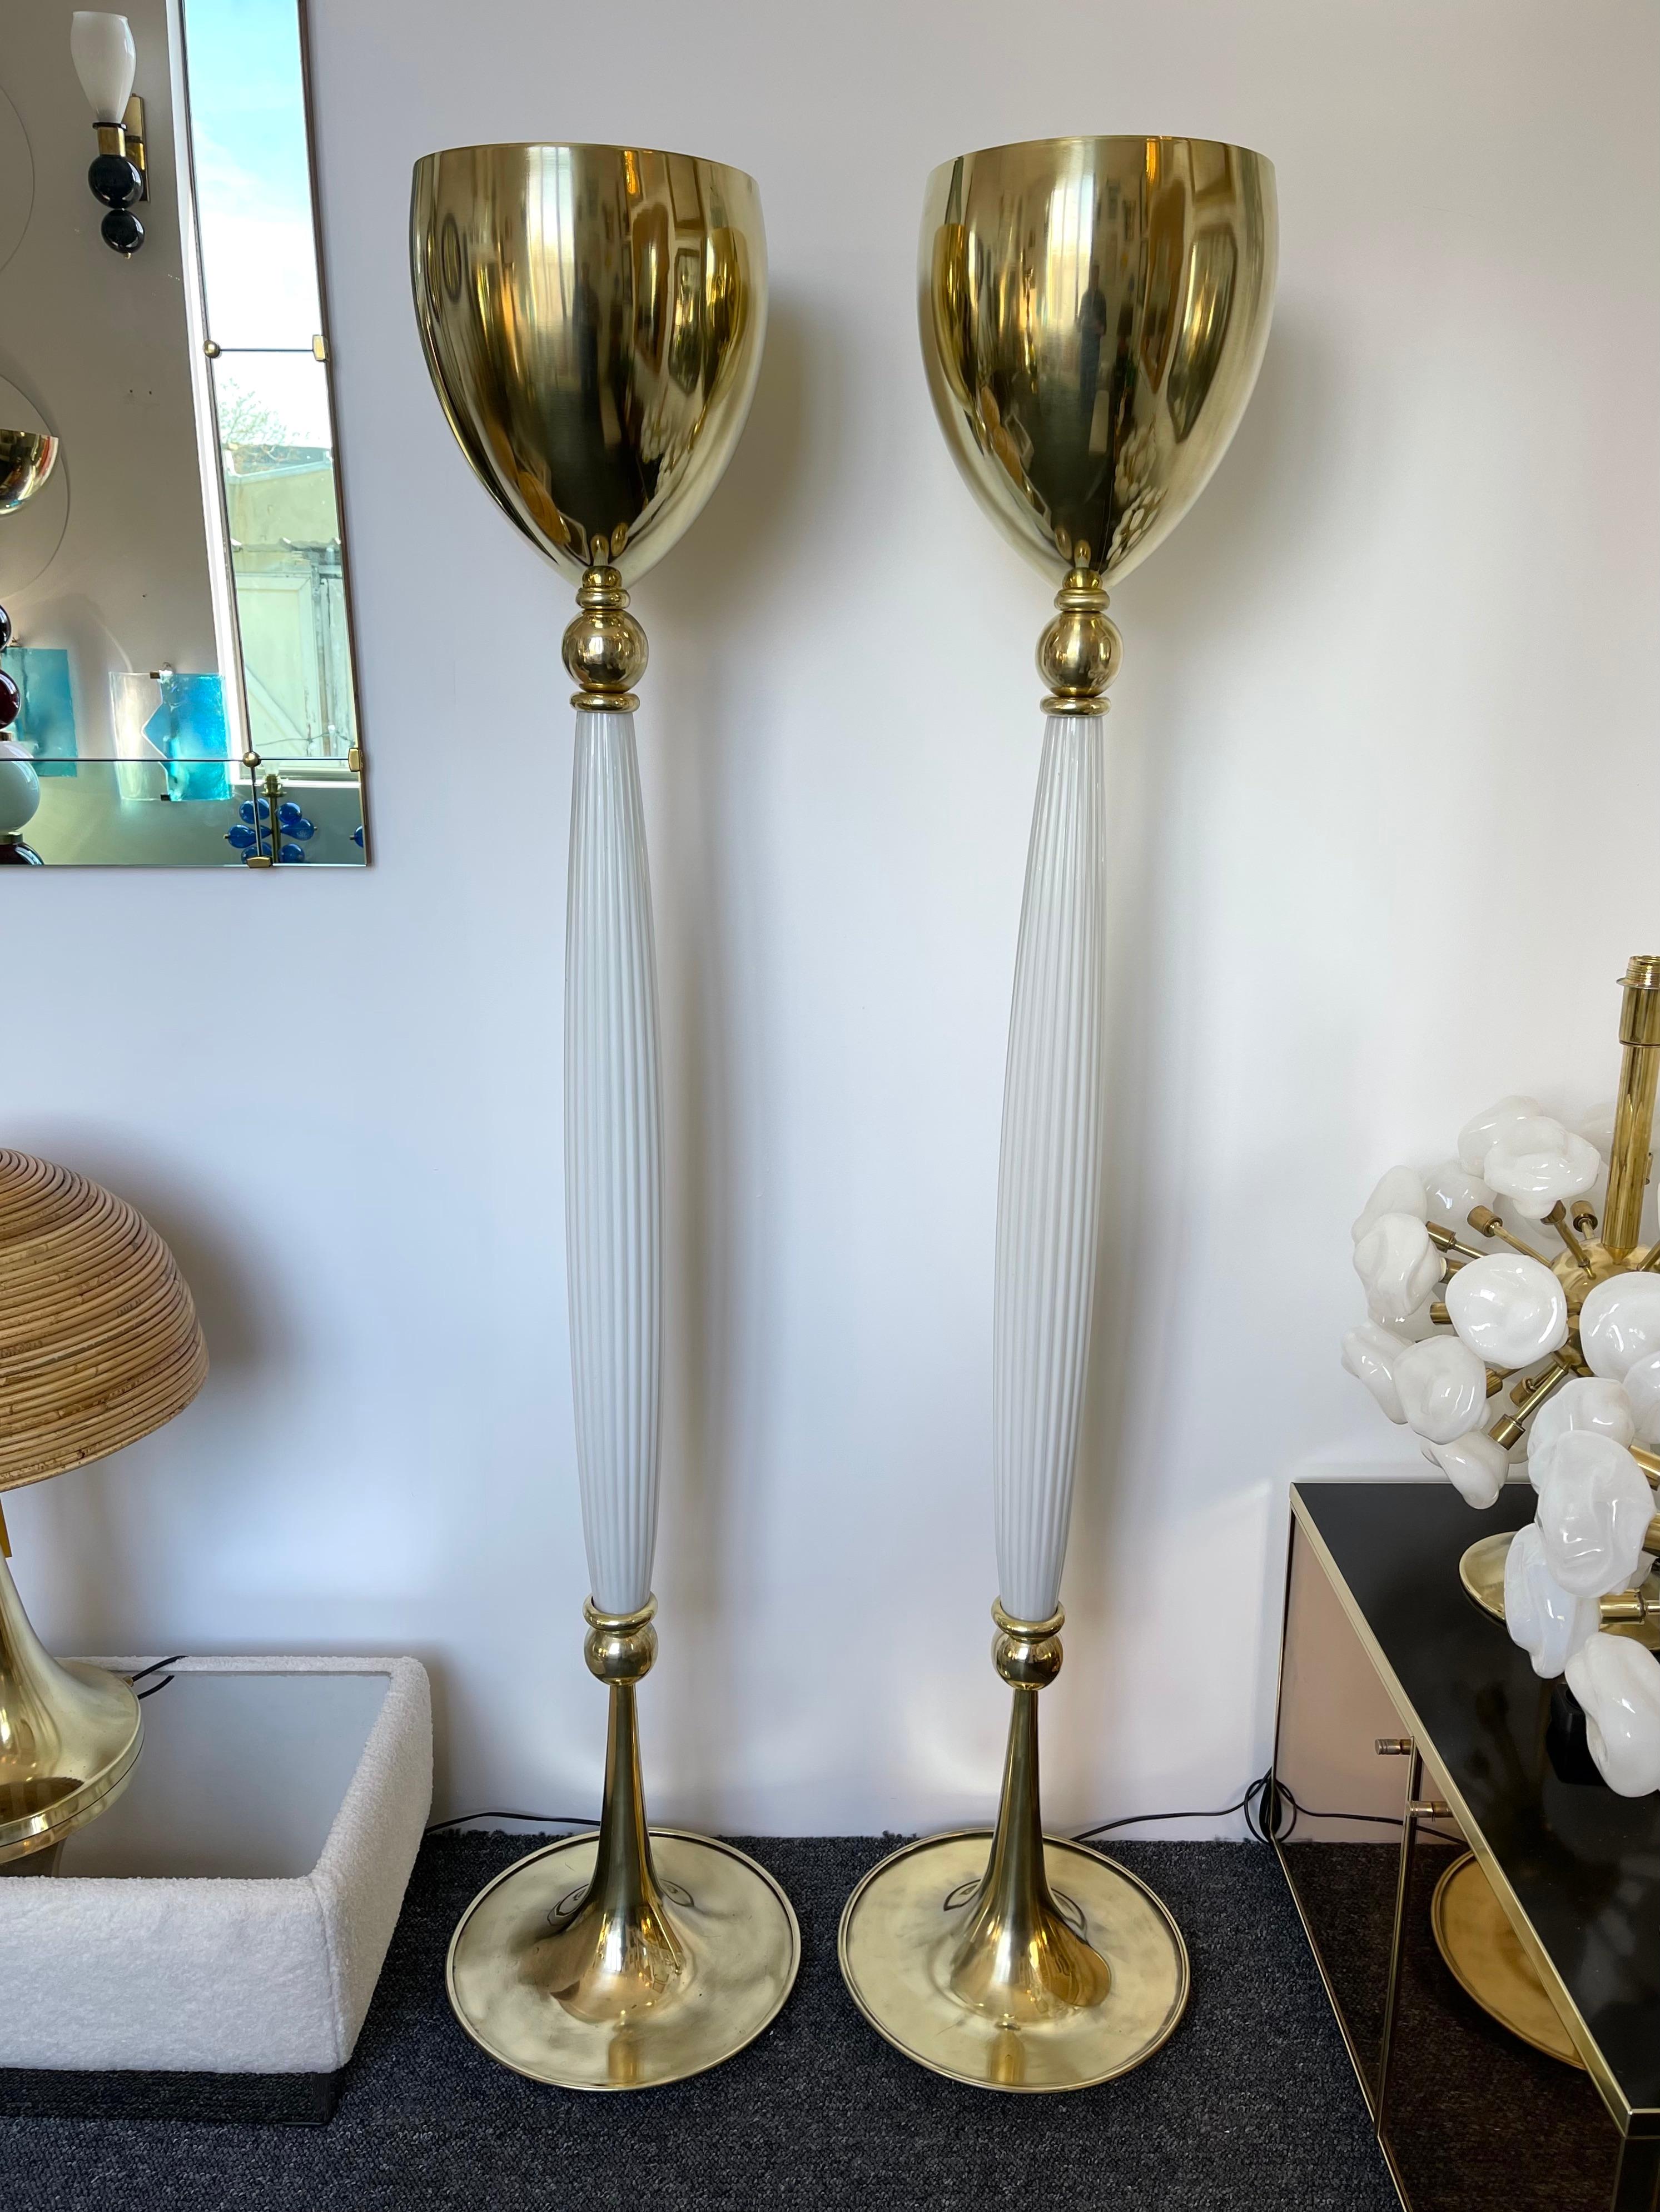 Floor lamp in brass and lmurano glass. Made with old stock of glass from the manufacture Seguso. Few exclusive production from a small italian design workshop. In the mood of Veronese, Mazzega, La Murrina, Maison Charles, Jansen, Venini, Vistosi,